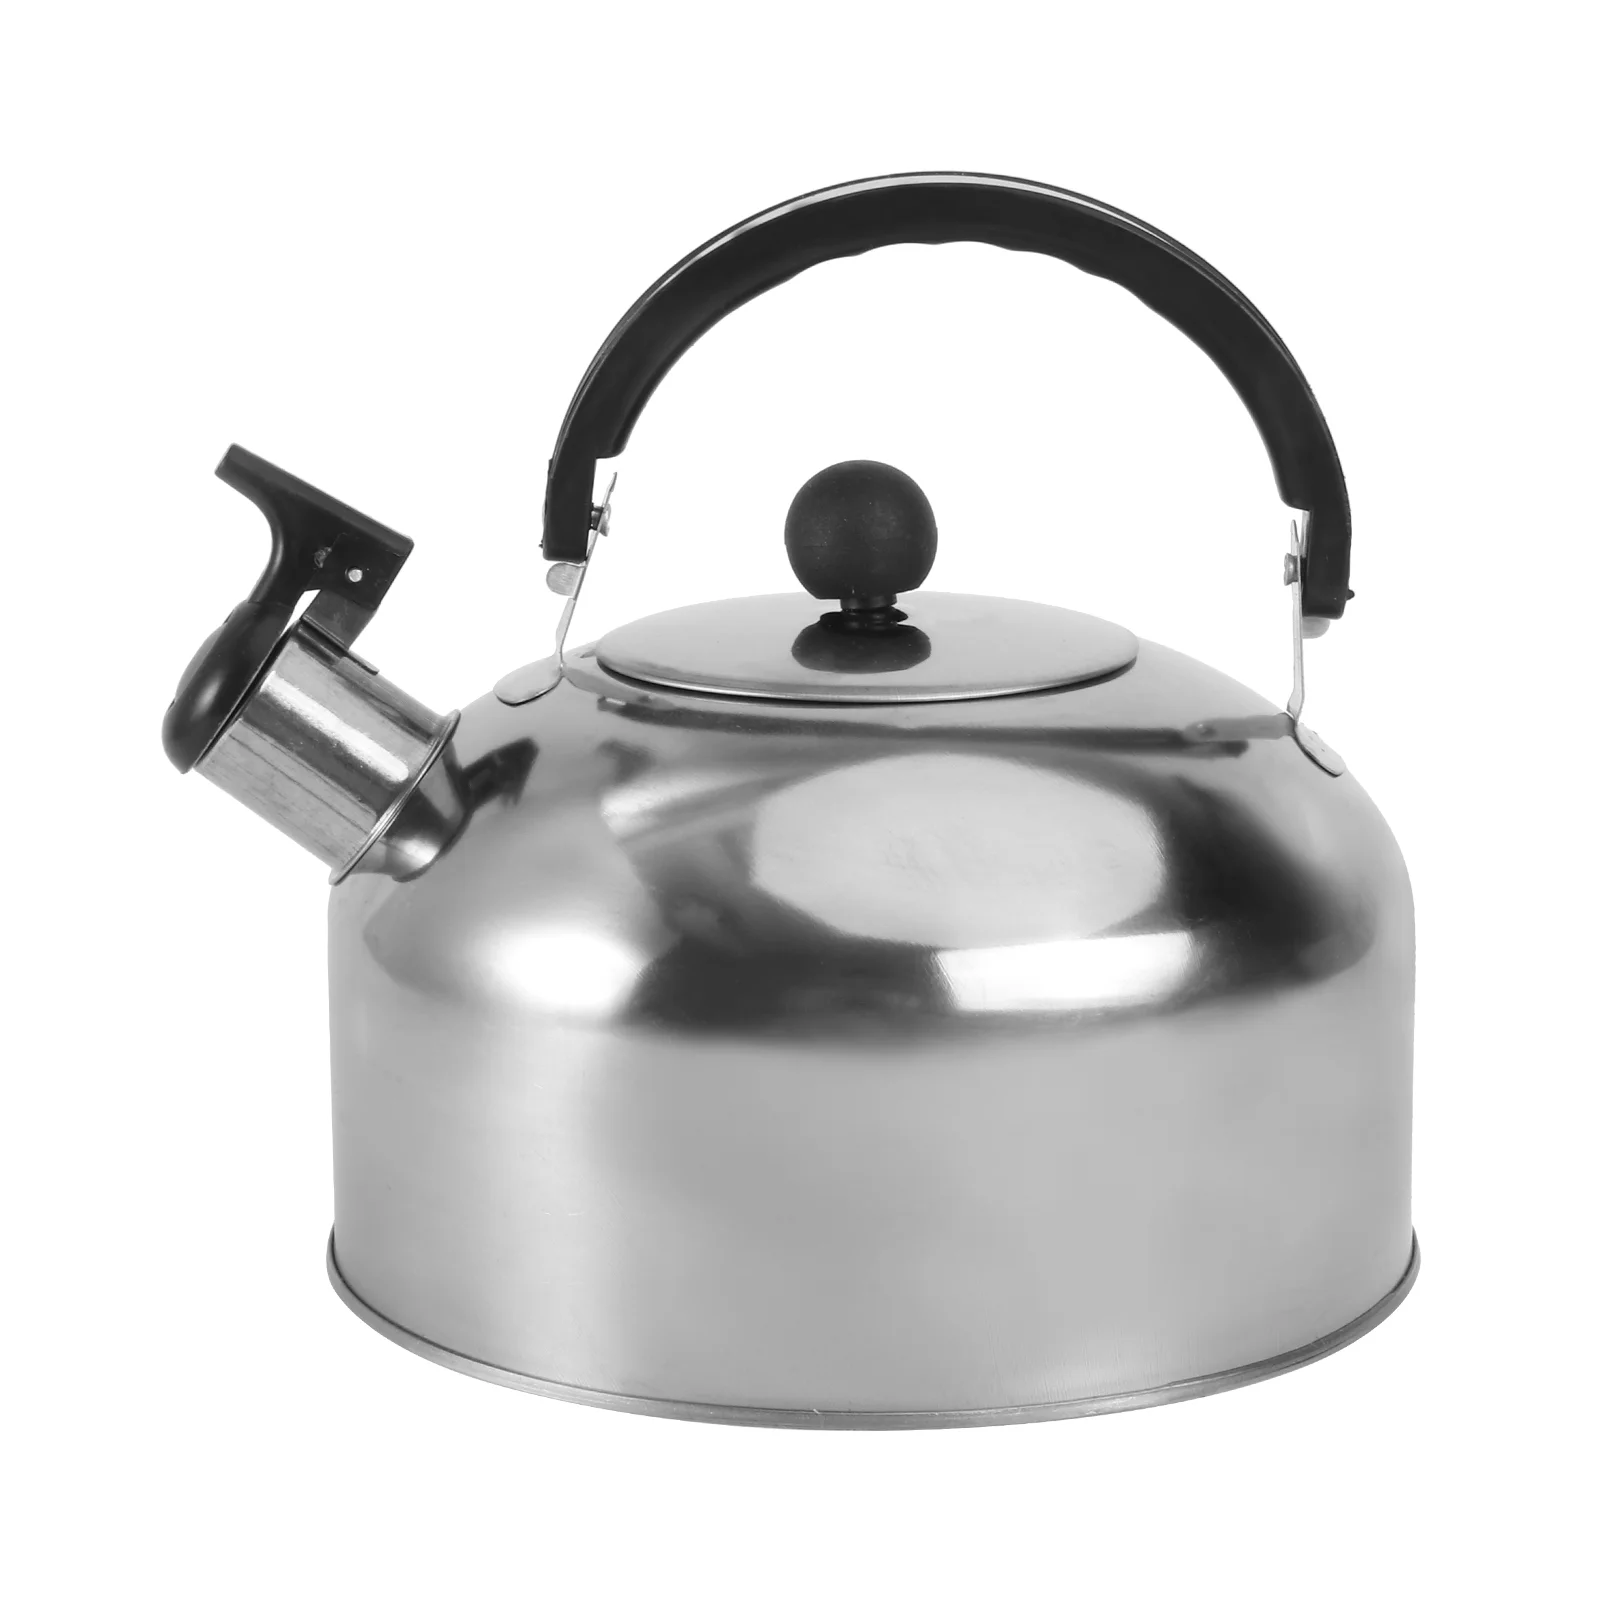 

Kettle Tea Whistling Teapot Stovetop Stove Water Steel Stainless Boiling Gas Pot Coffee Kettles Pots Camping Boiled Hot Heating